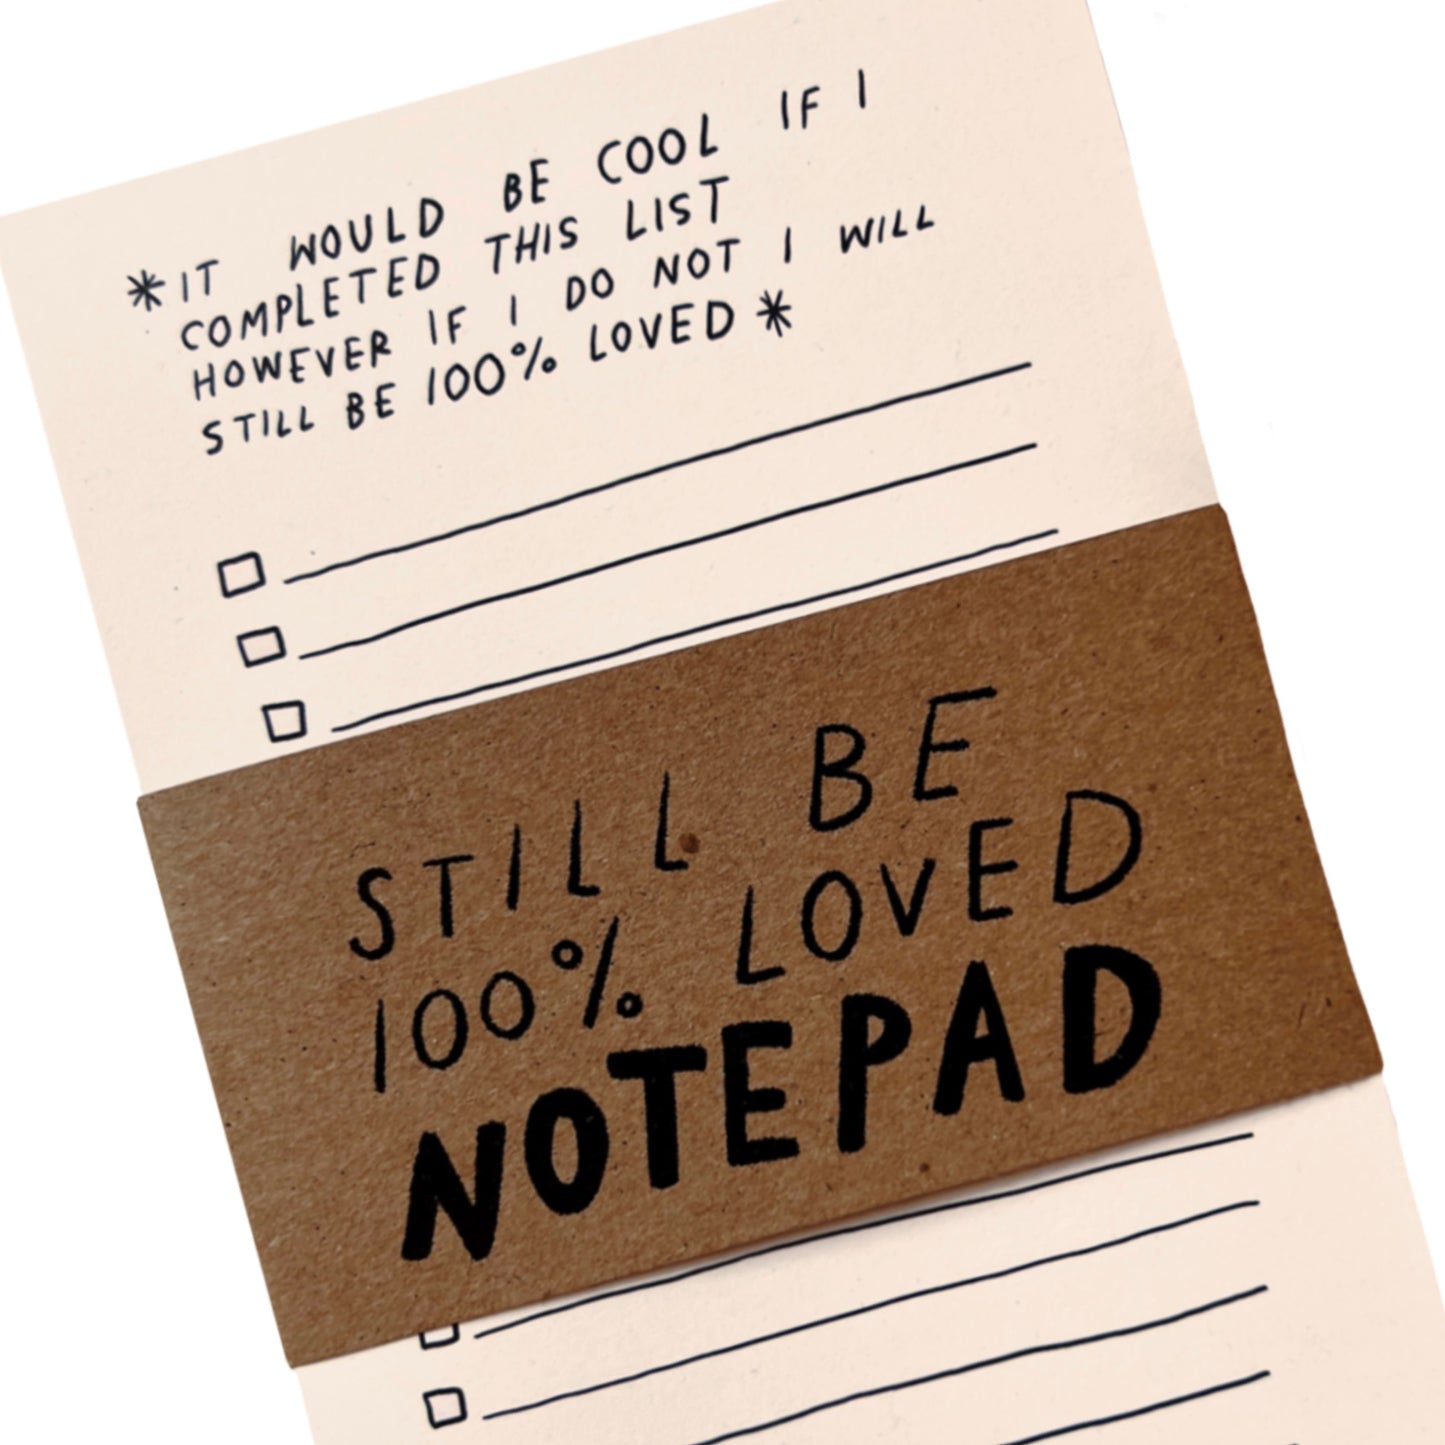 “STILL BE LOVED” To Do List Notepad